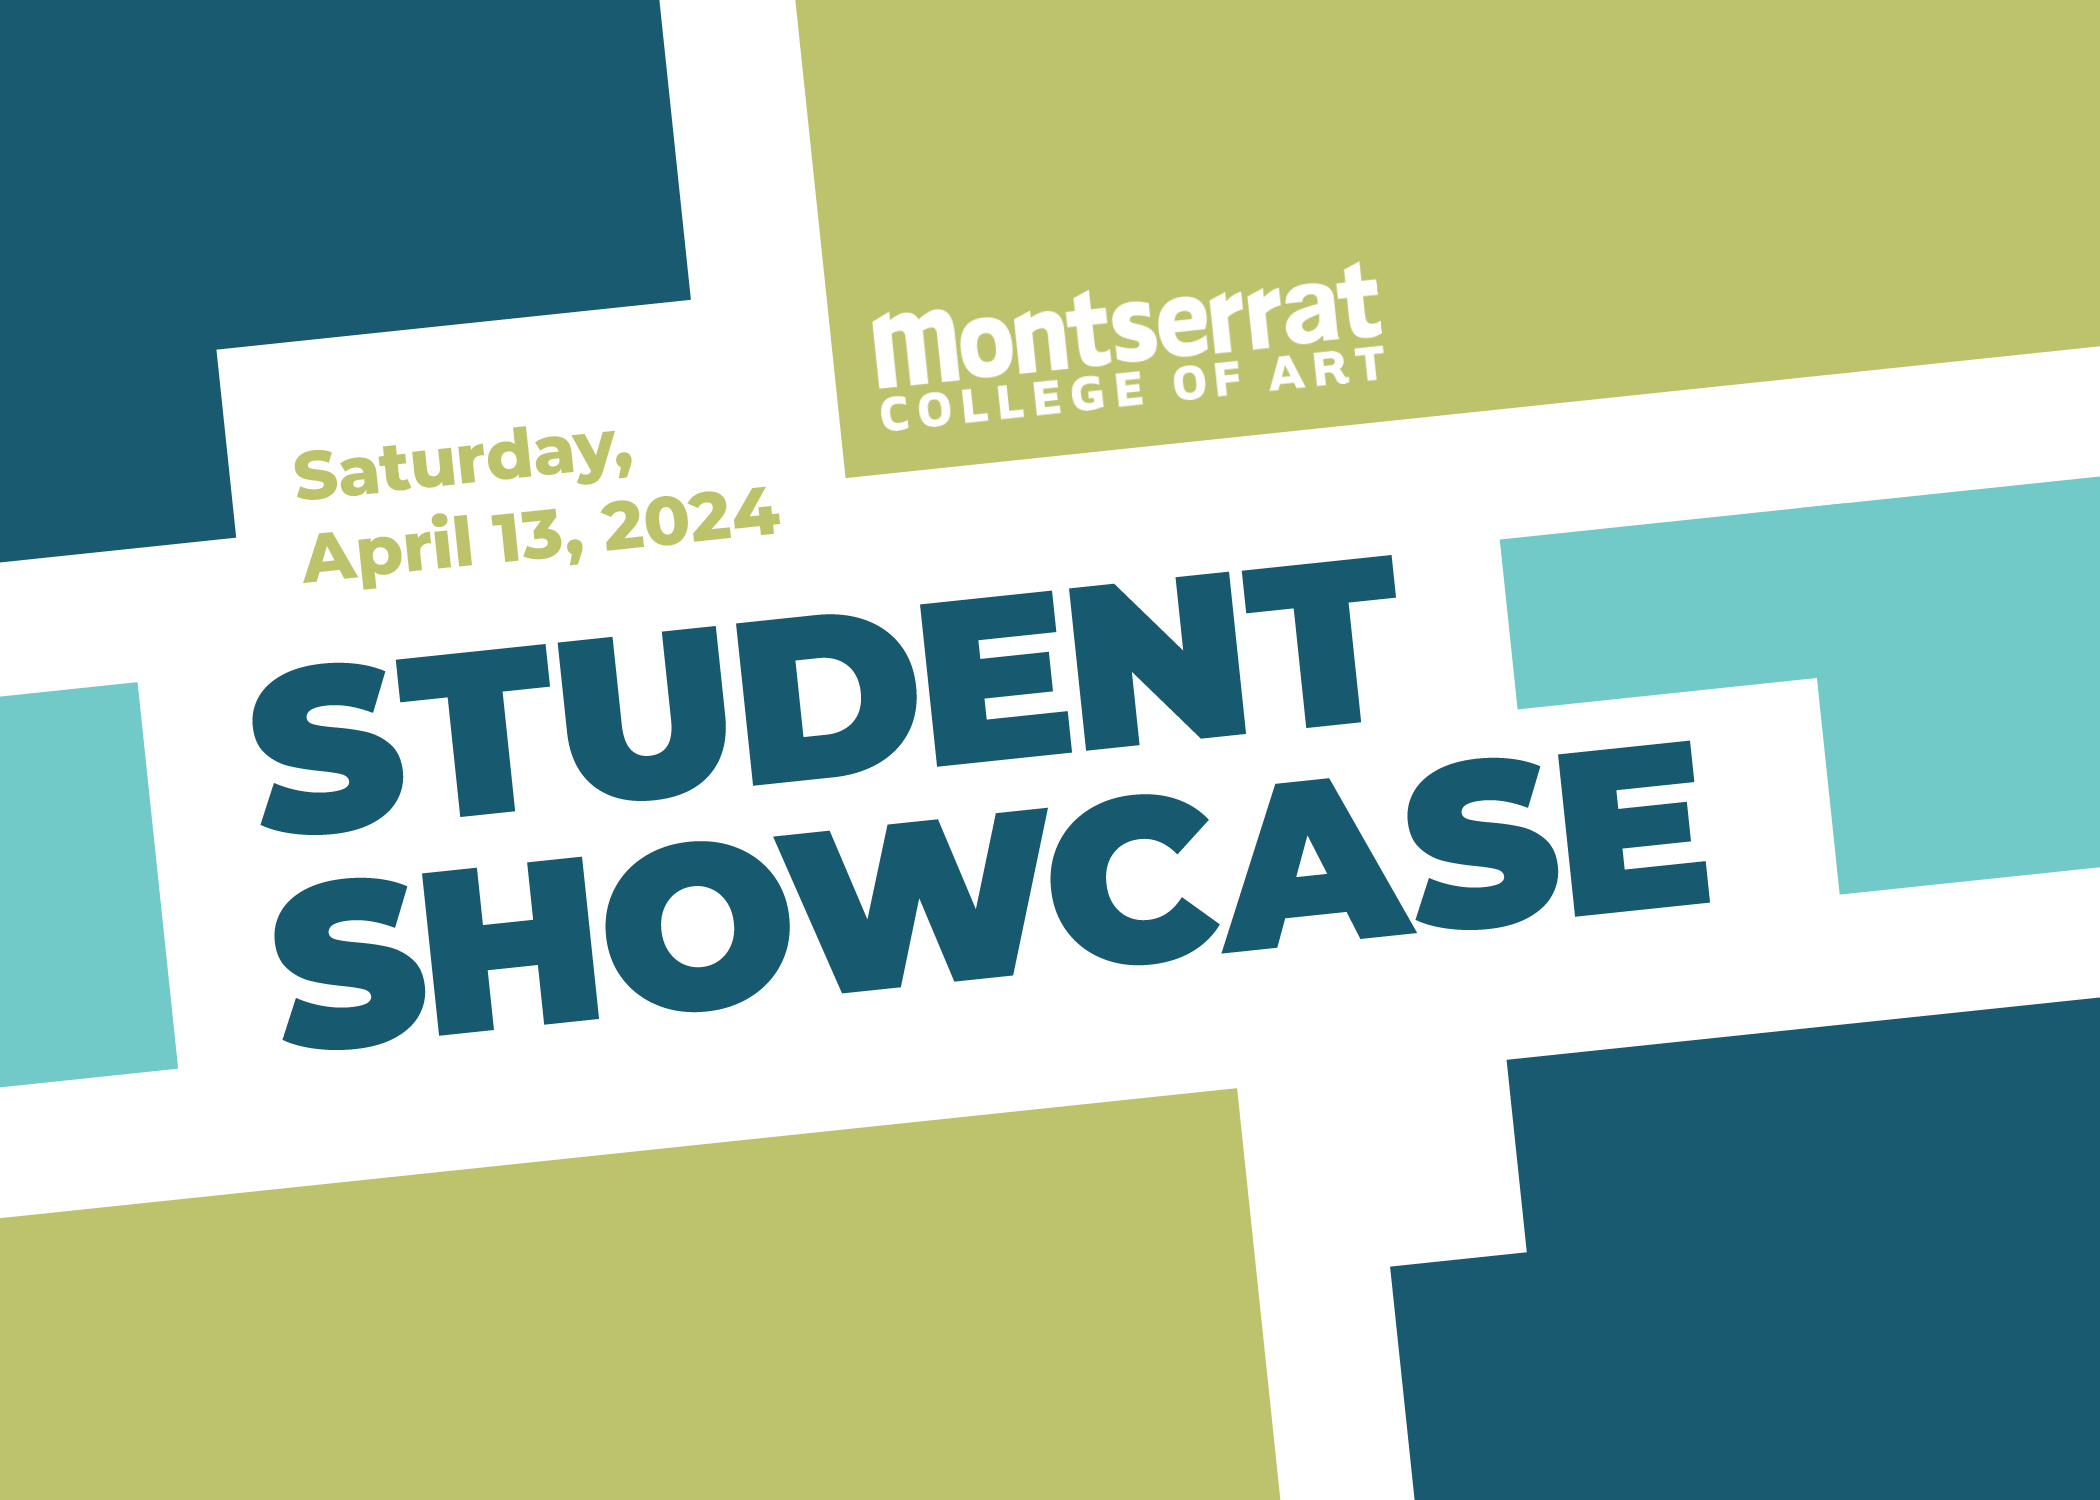 We're creating a visually compelling poster for Montserrat College of Art's Student Showcase, set to happen on Saturday, April 13, 2024. This eye-catching design will make use of bold typography and an attractive blue-green color palette.